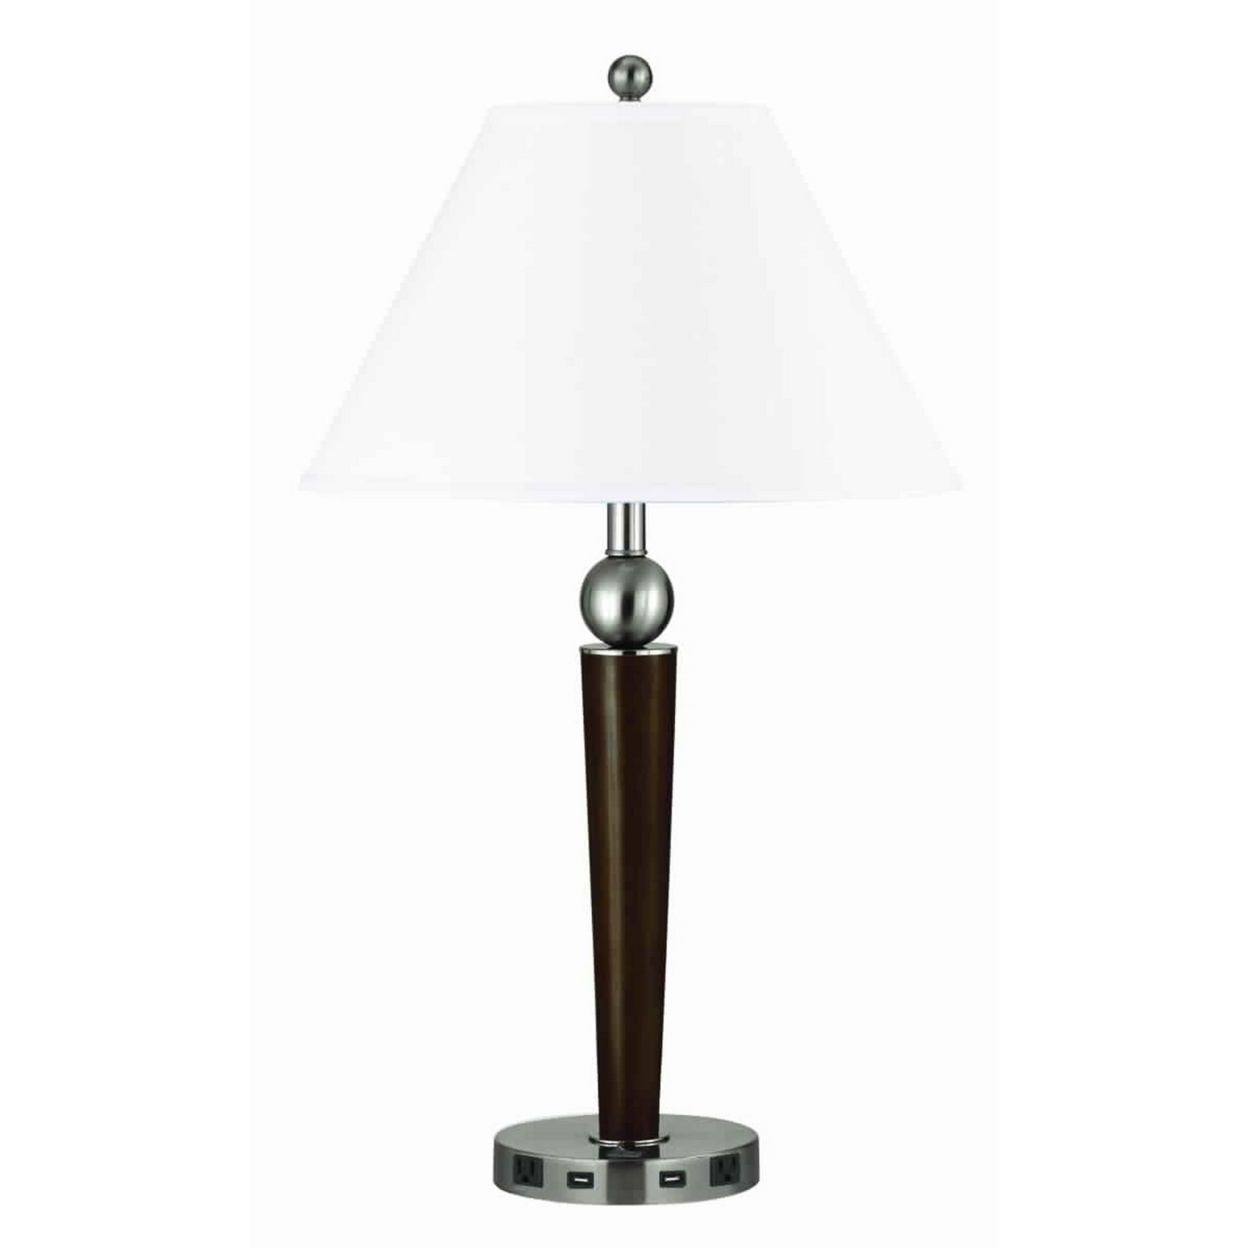 Fabric Shade Table Lamp With Metal Base And Ball Accent, White And Brown- Saltoro Sherpi